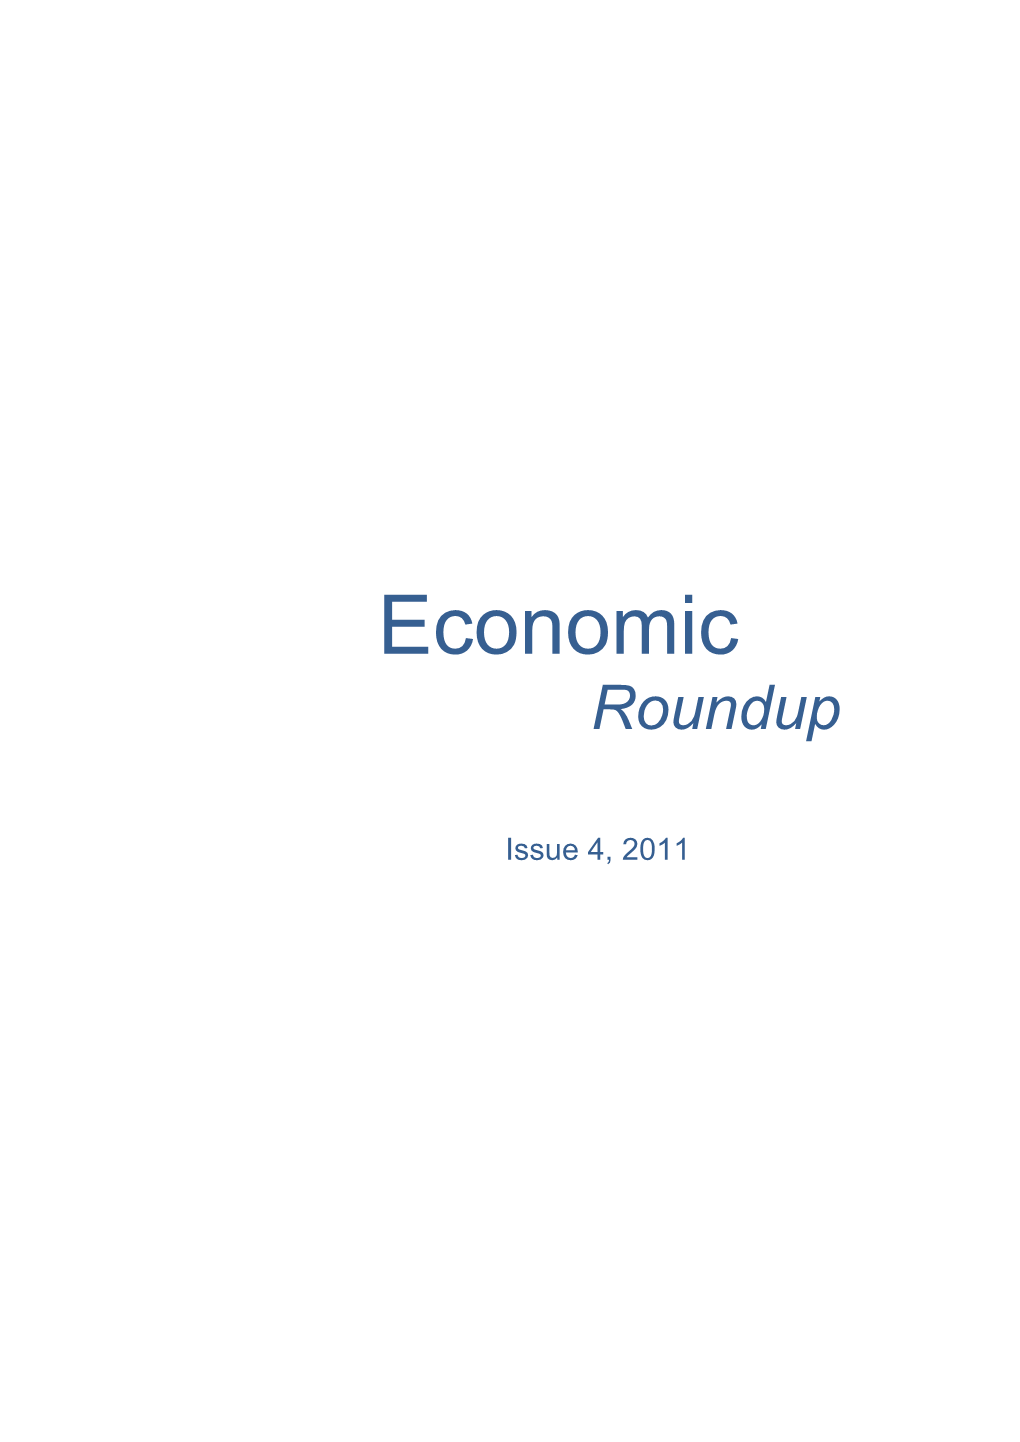 Economic Roundup Issue 4 Consolidated Version